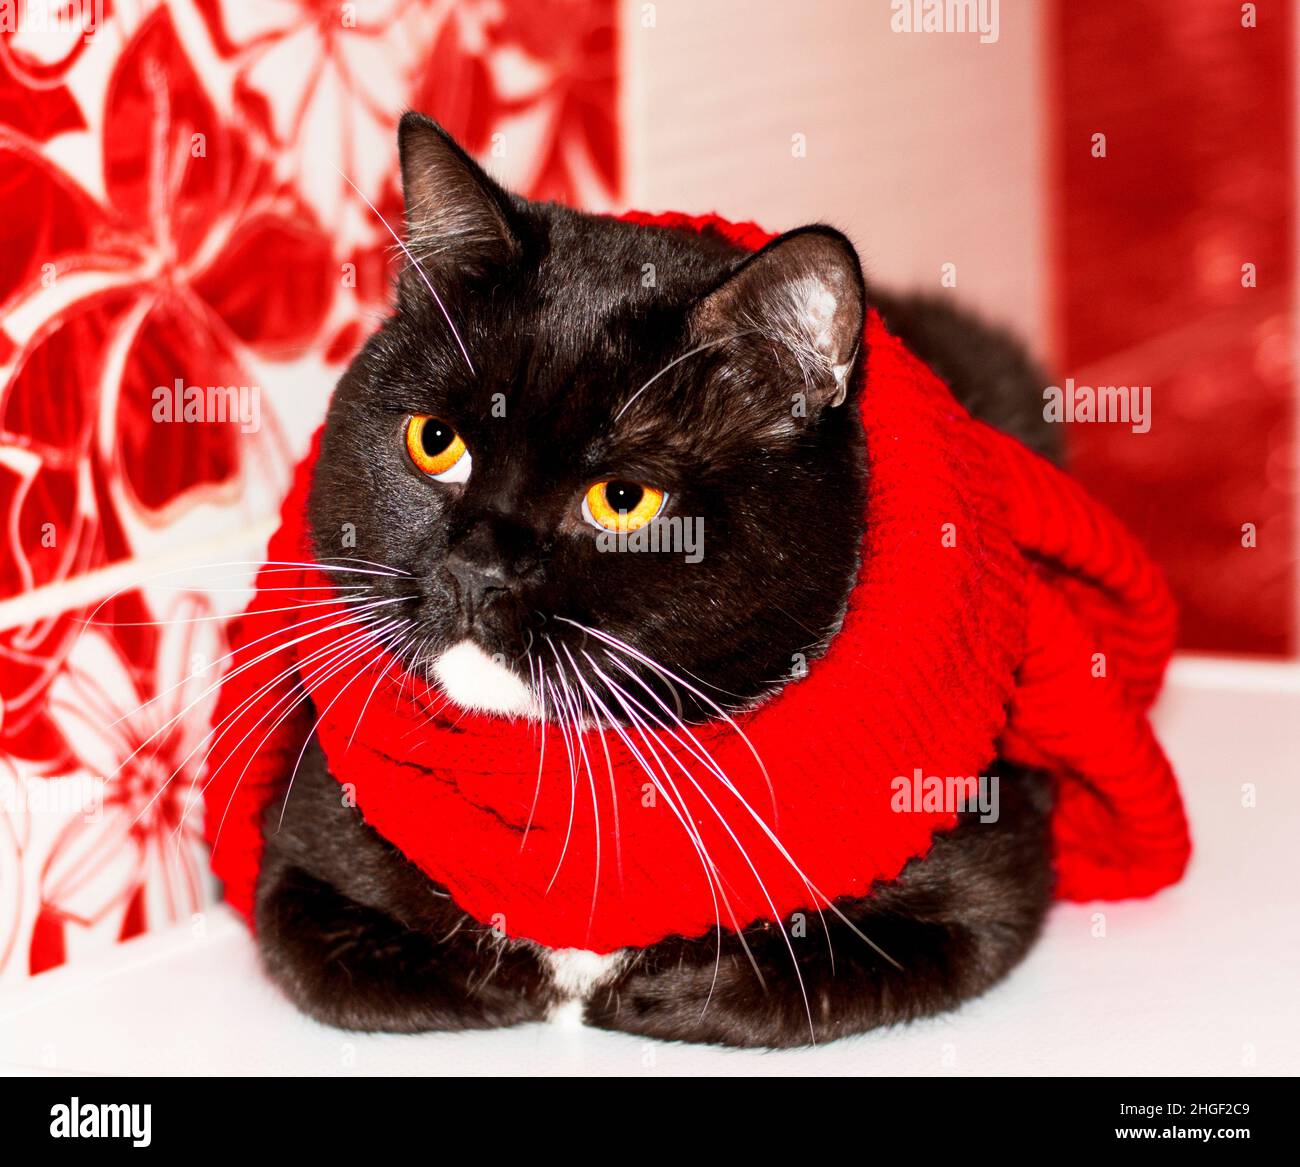 British bicolor cat close-up in a red scarf on a red background, winter is cold, theme cats, kittens and cats in the house, pets their photos and thei Stock Photo